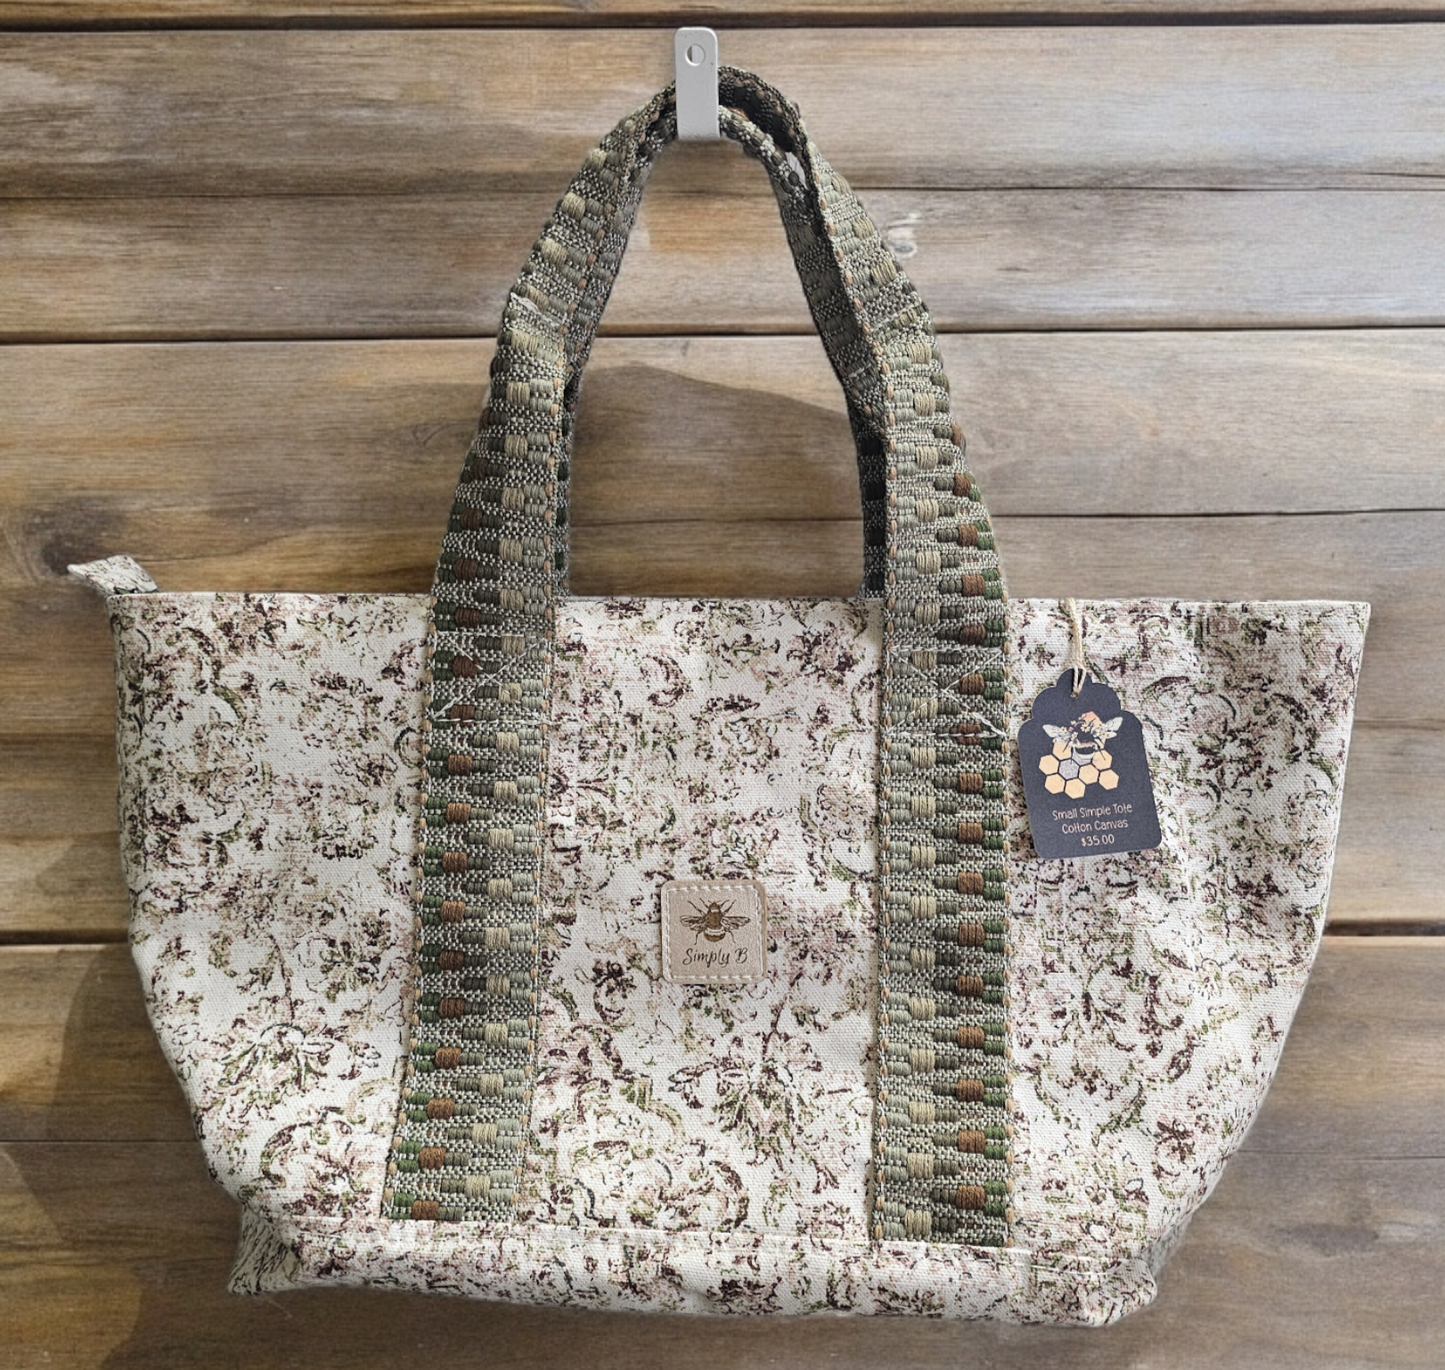 Simply B: Small Simple Tote- Floral Print Cotton Canvas